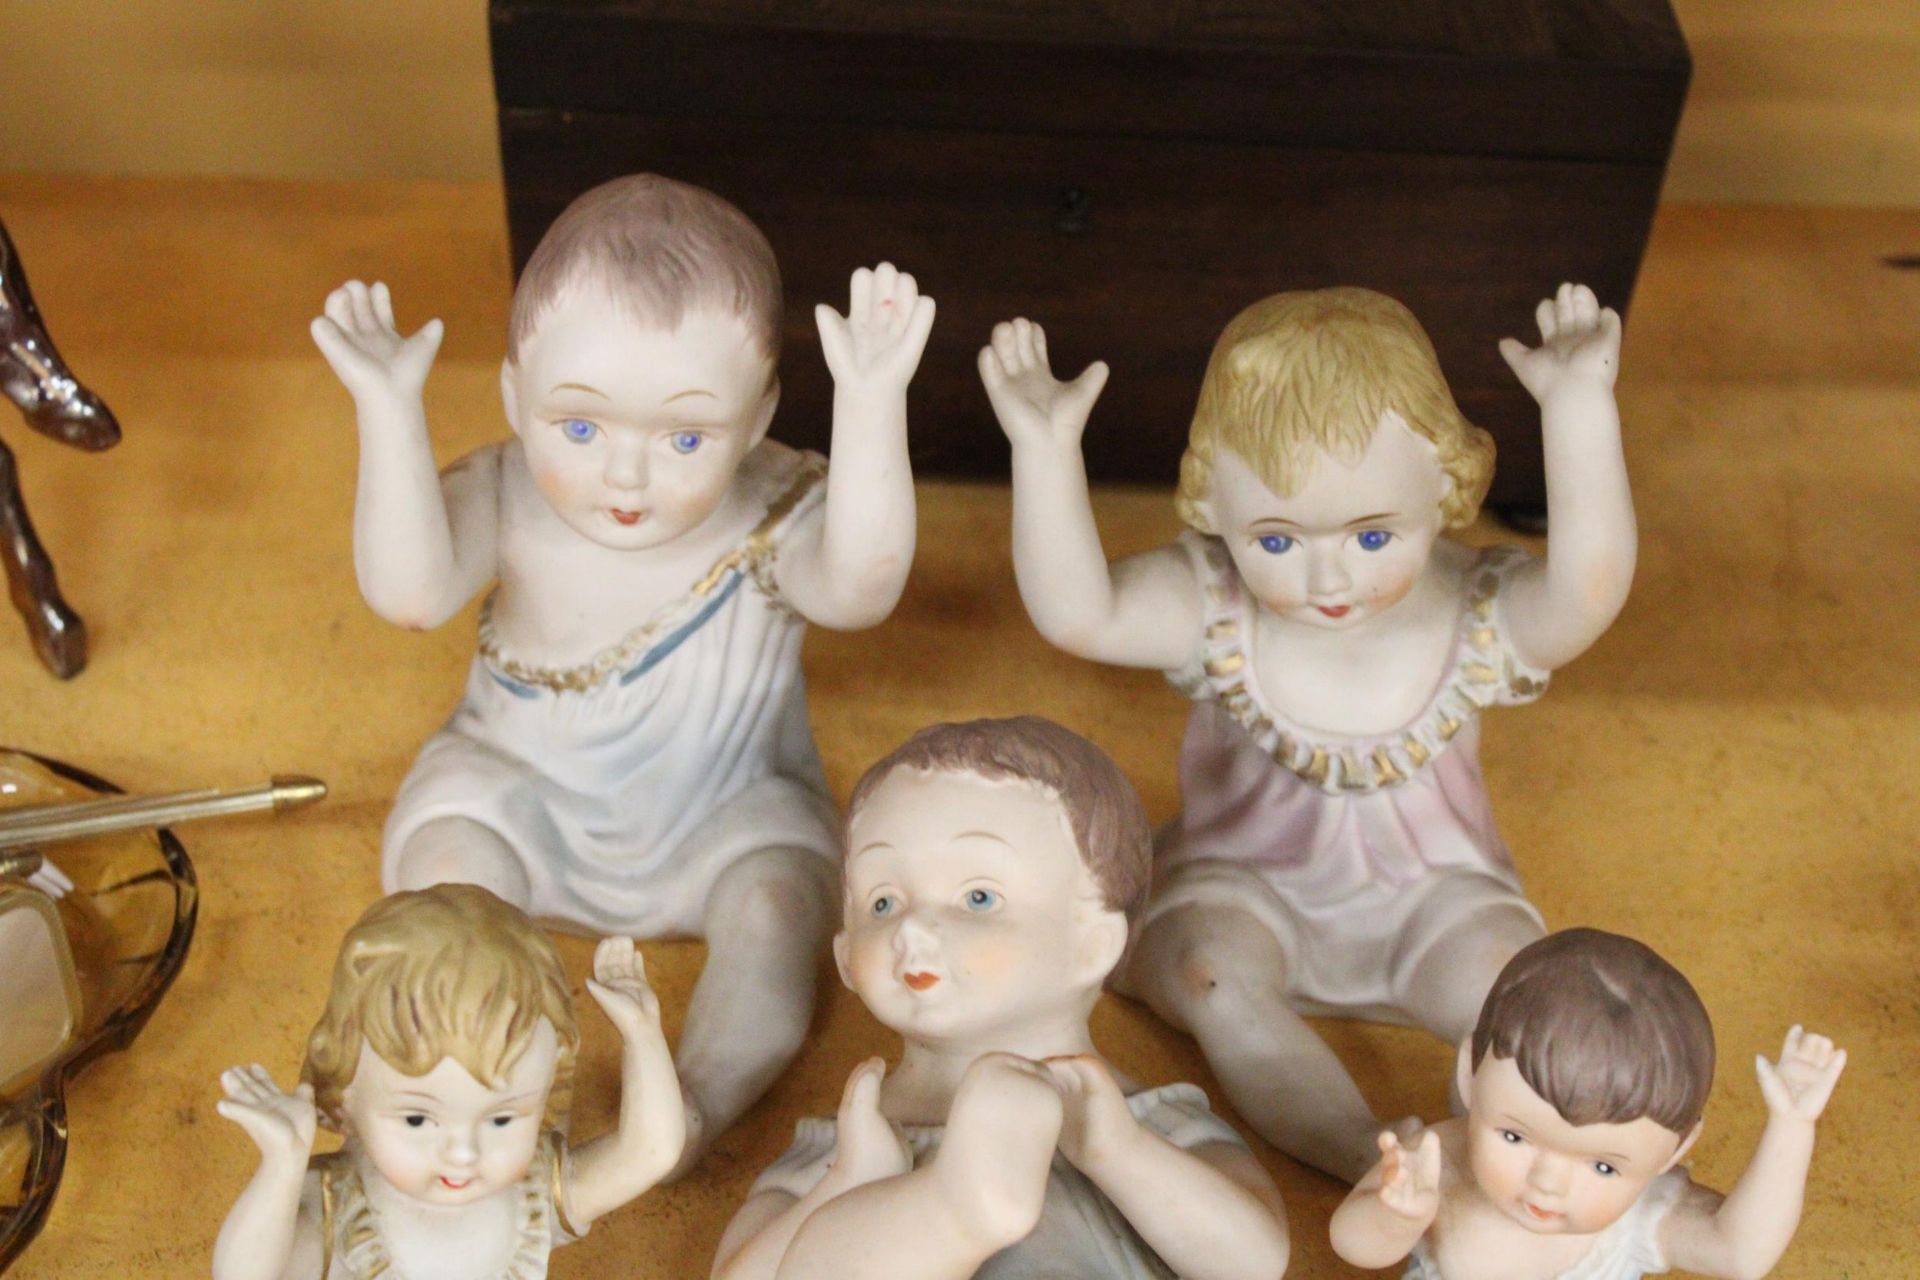 THREE LARGE AND FOUR SMALL ANTIQUE PORCELAIN, BISQUE DOLLS - Image 2 of 5